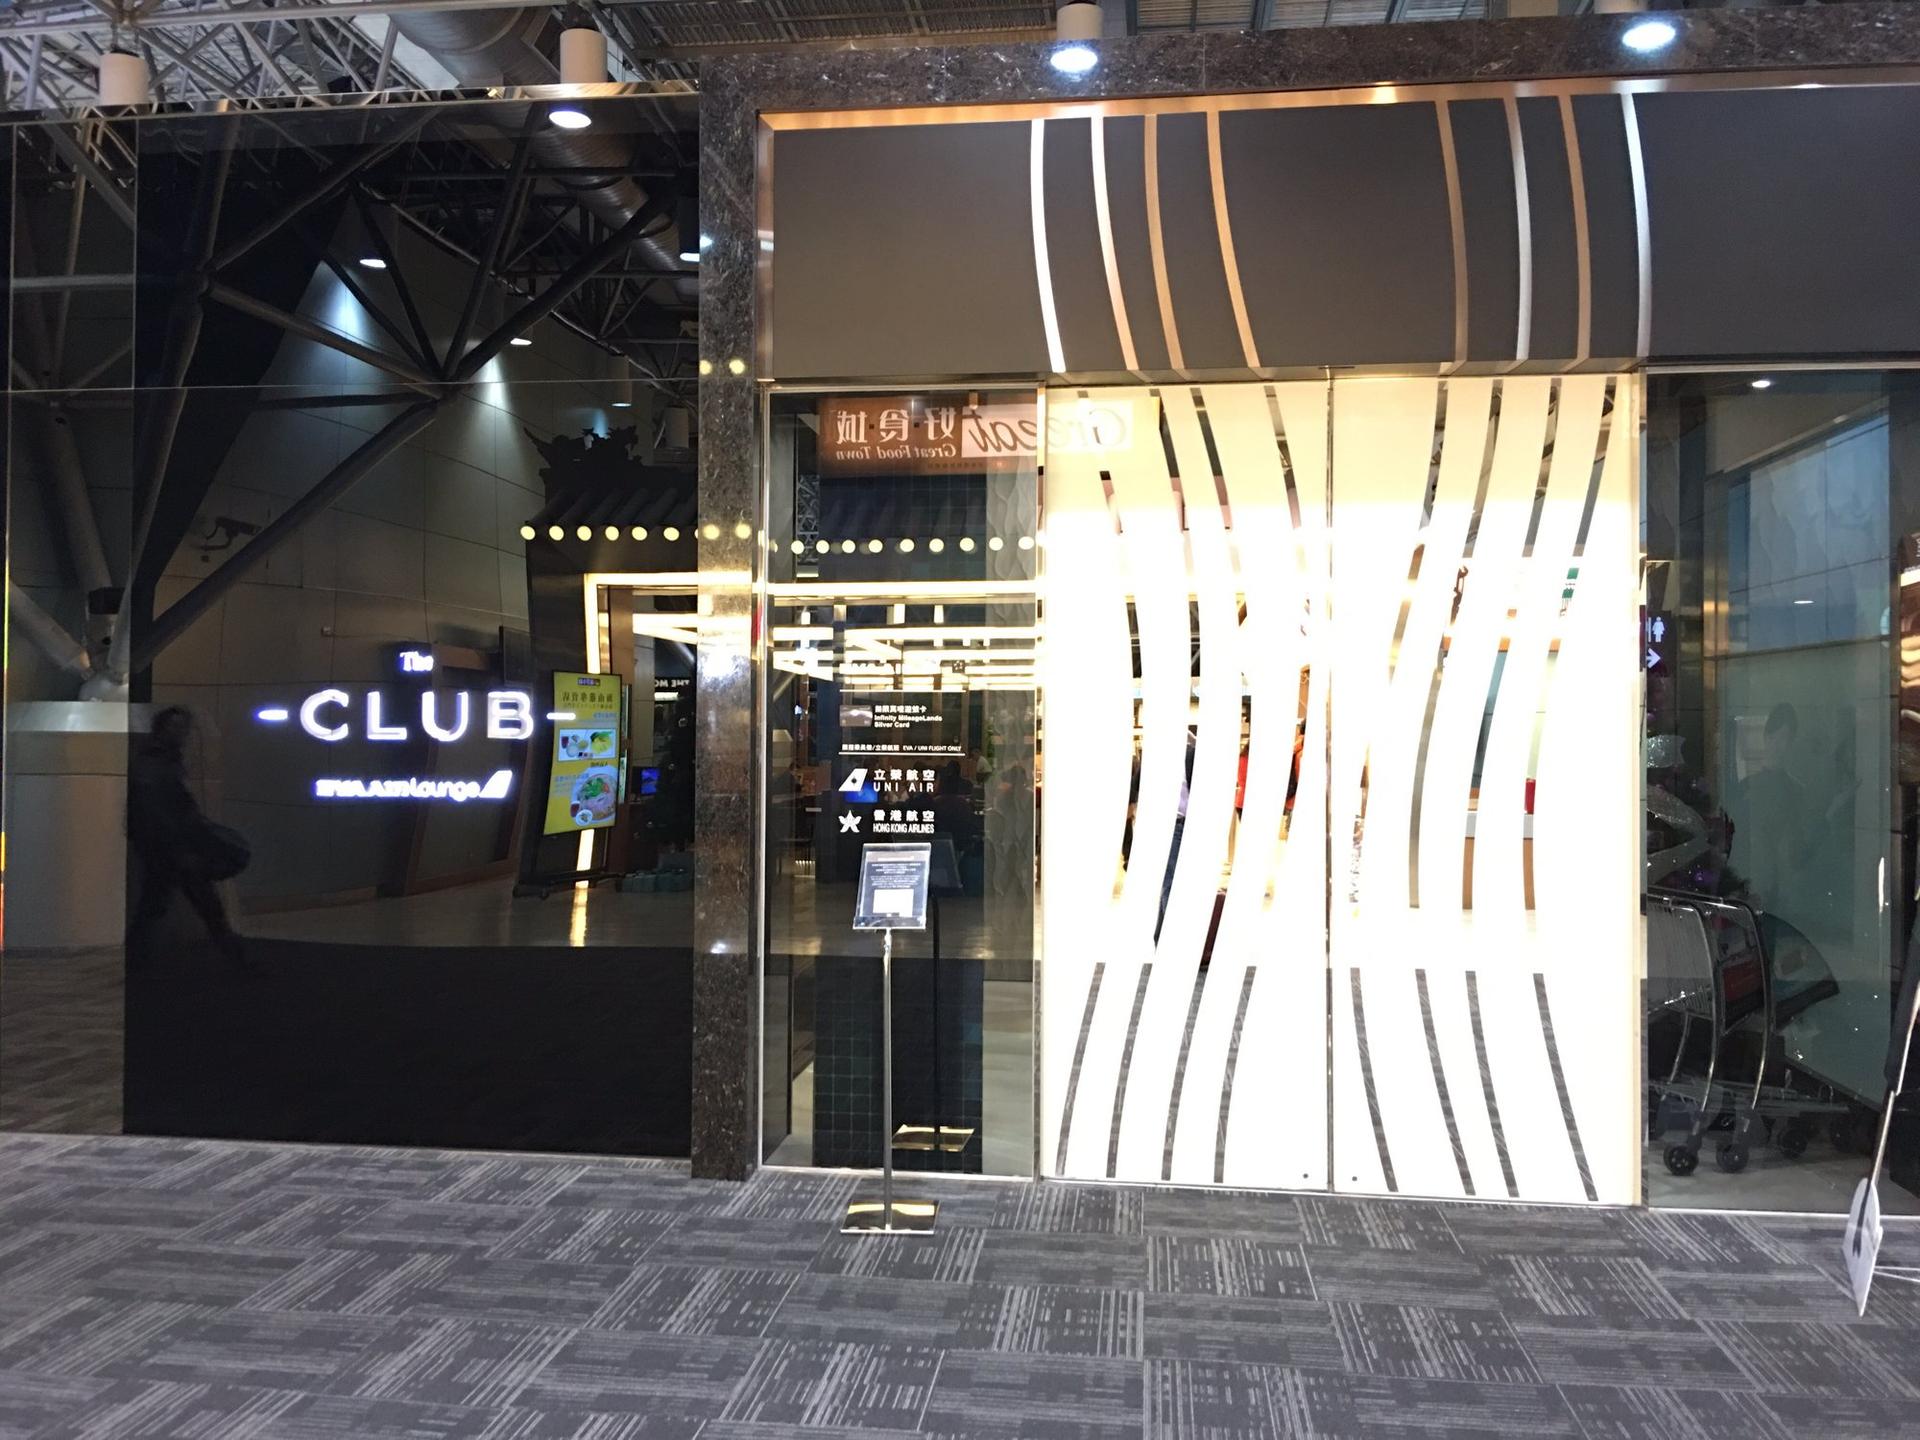 The Club by EVA Air image 8 of 12